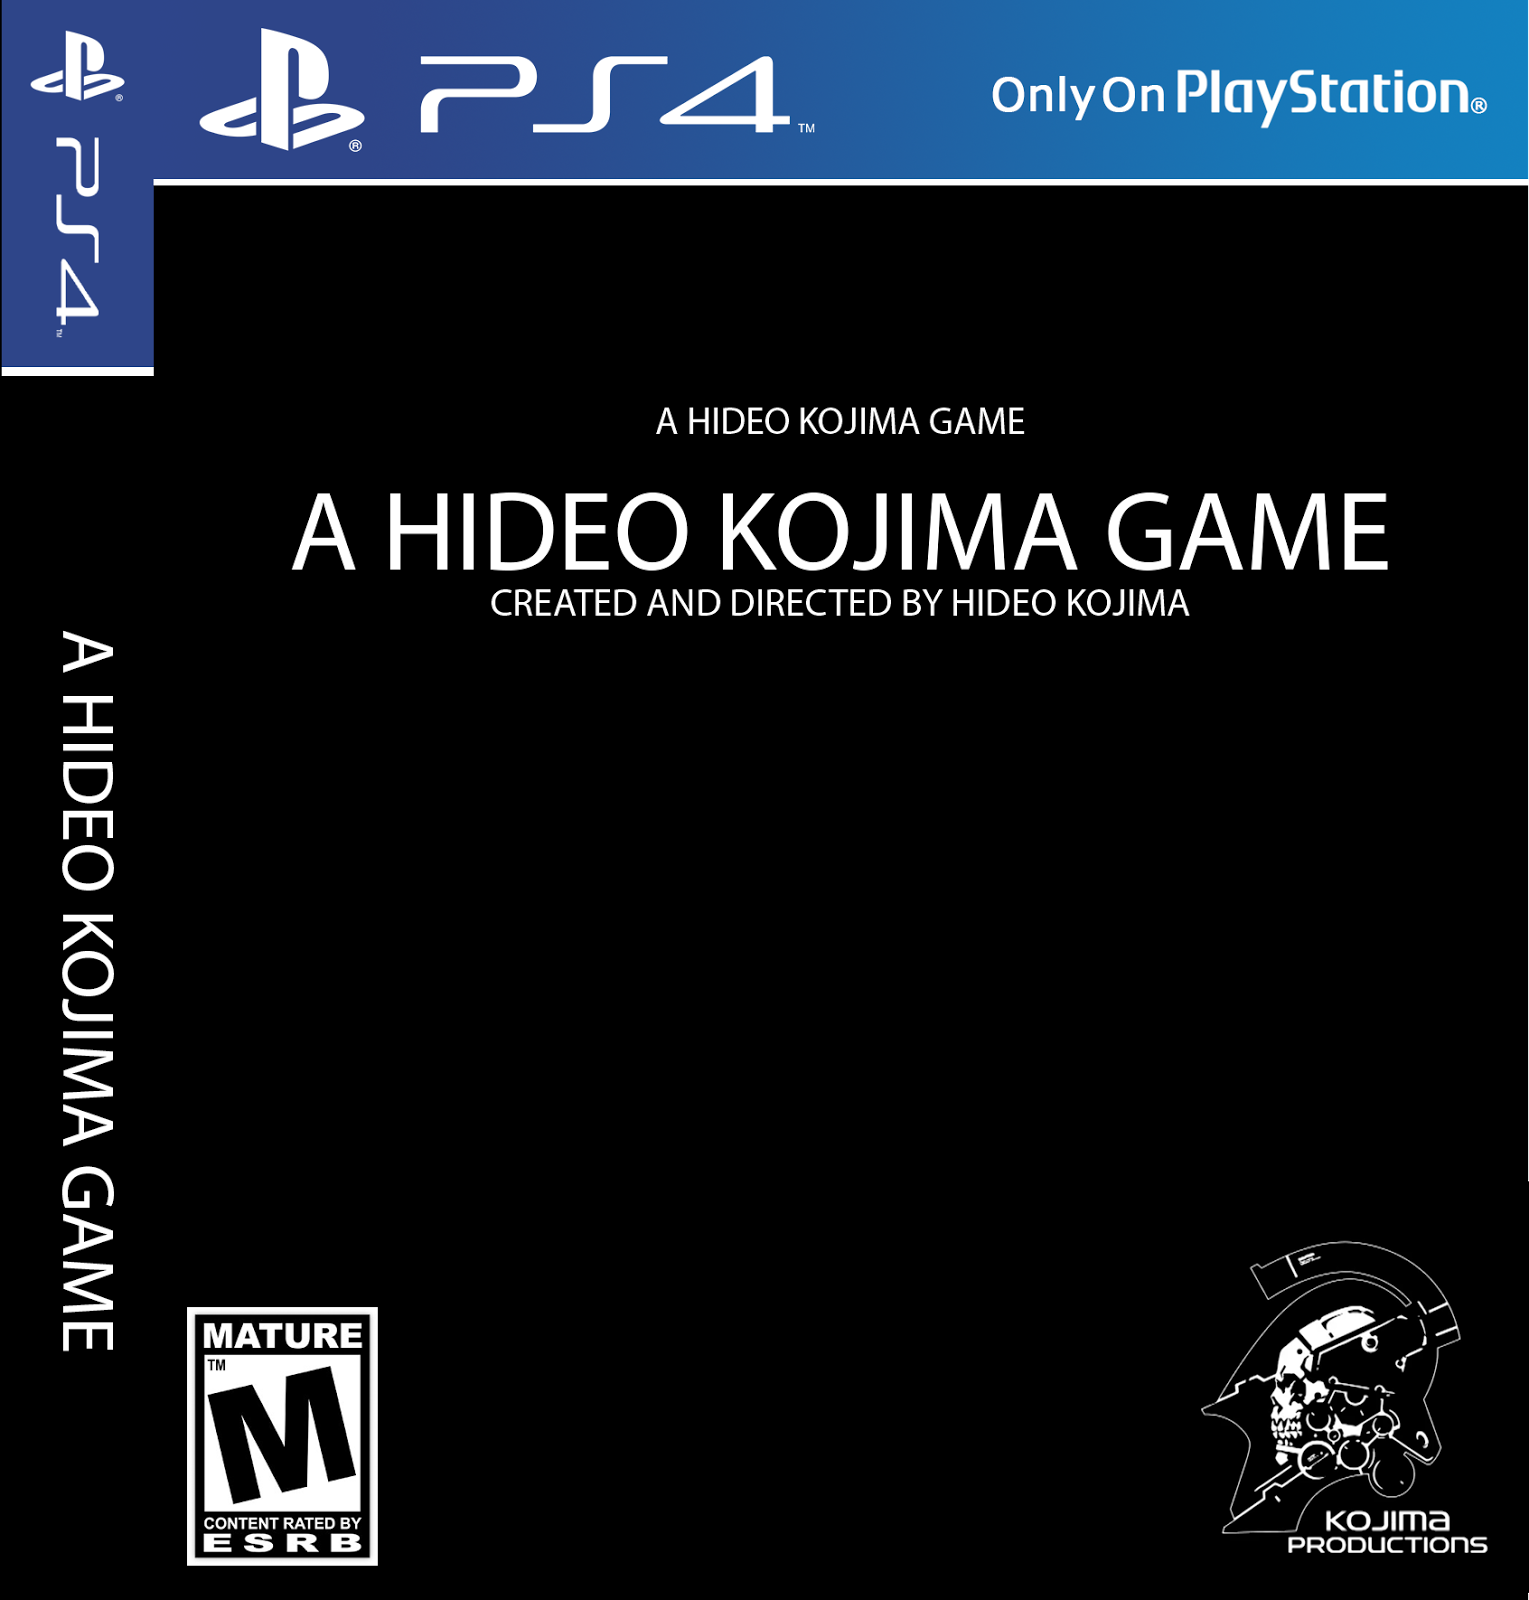 hideo kojima game meme - B P S 4 Only on PlayStation. Tm PS4 A Hideo Kojima Game A Hideo Kojima Game Created And Directed By Hideo Kojima A Hideo Kojima Game Mature Content Rated By E Srb Kojima Productions